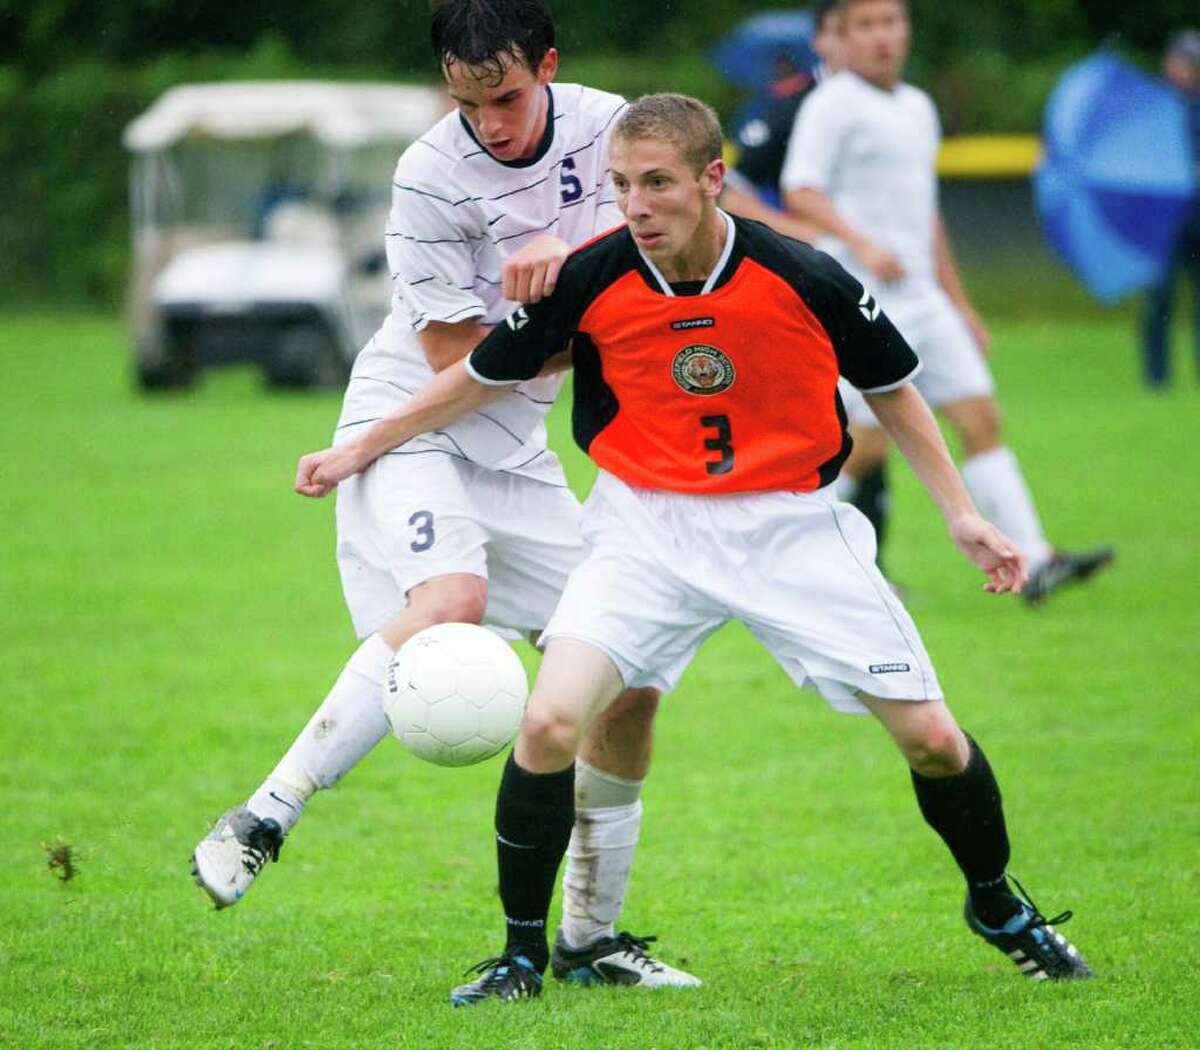 Staples' Ben Root and Ridgefield's Travis Leiter in action as Staples High School hosts Ridgefield in a boys soccer game in Westport, Conn., Sept. 28, 2011.